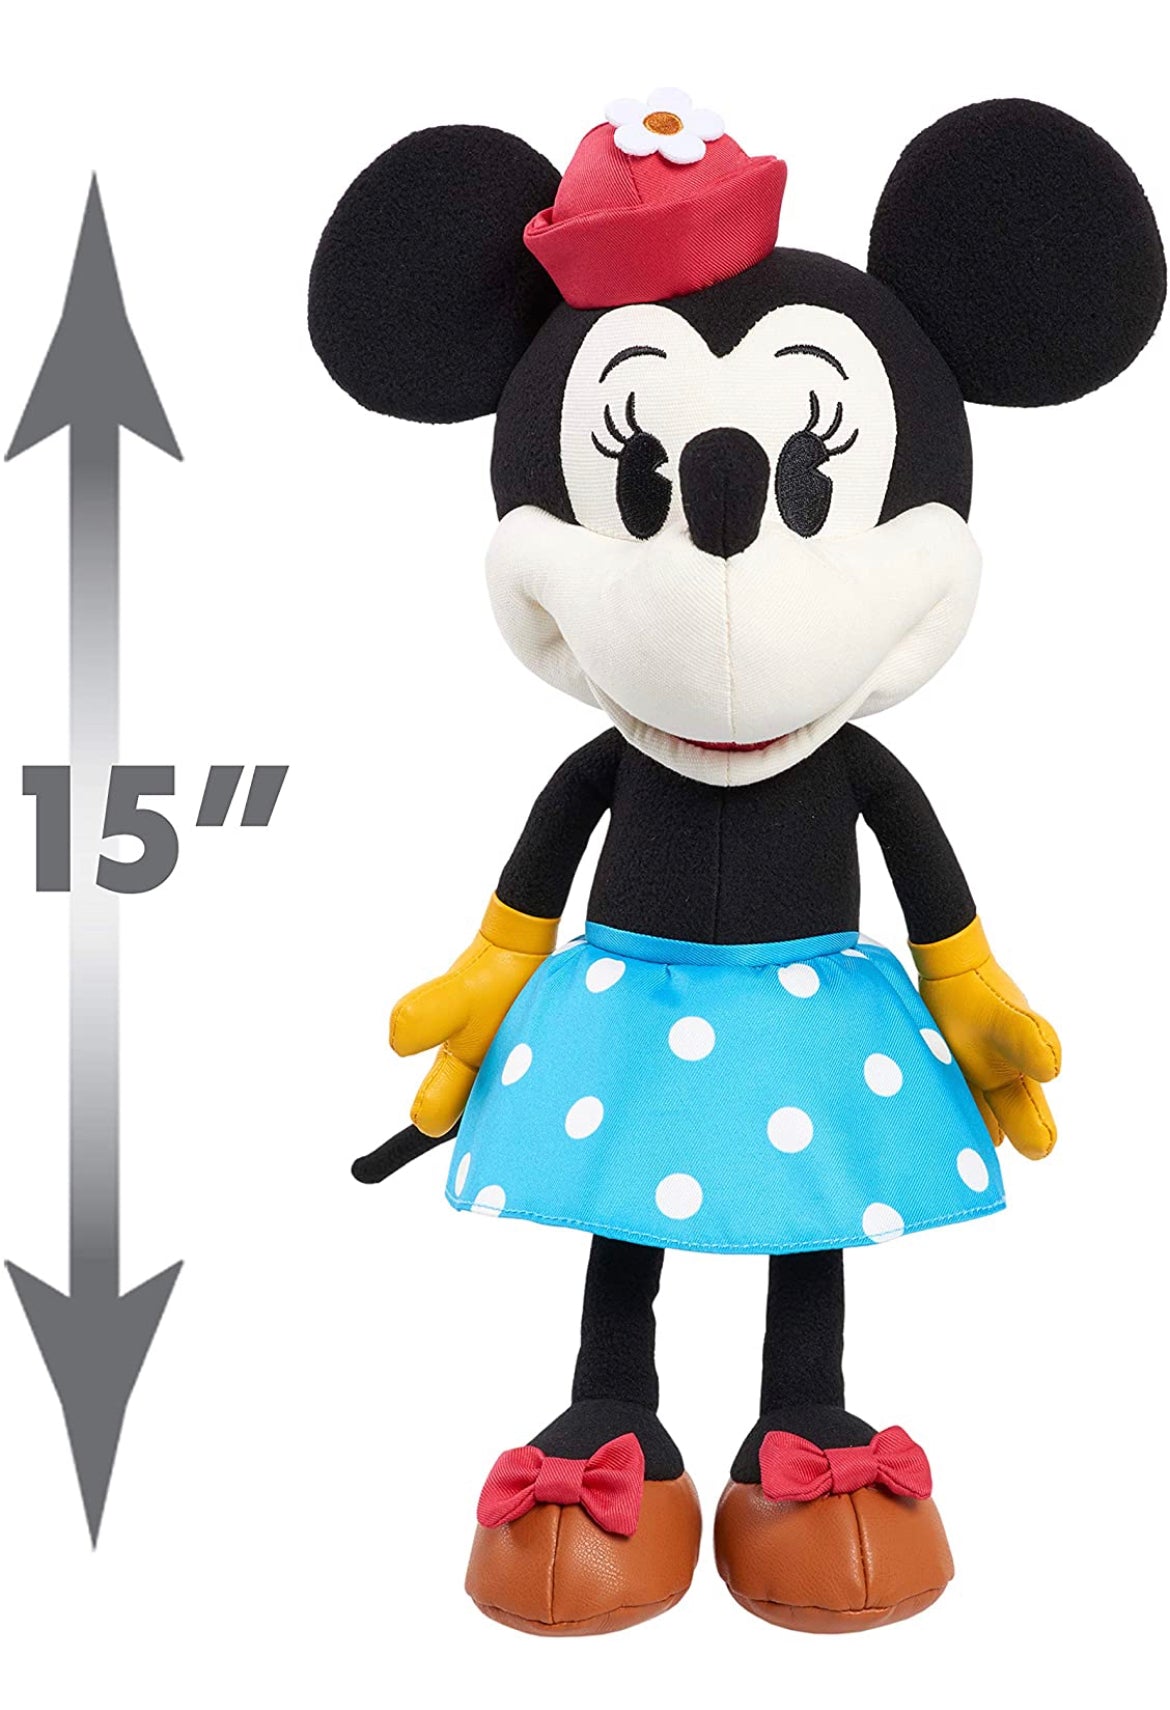 Disney Treasures From the Vault, Limited Edition Mickey Mouse and Minnie Mouse Plush